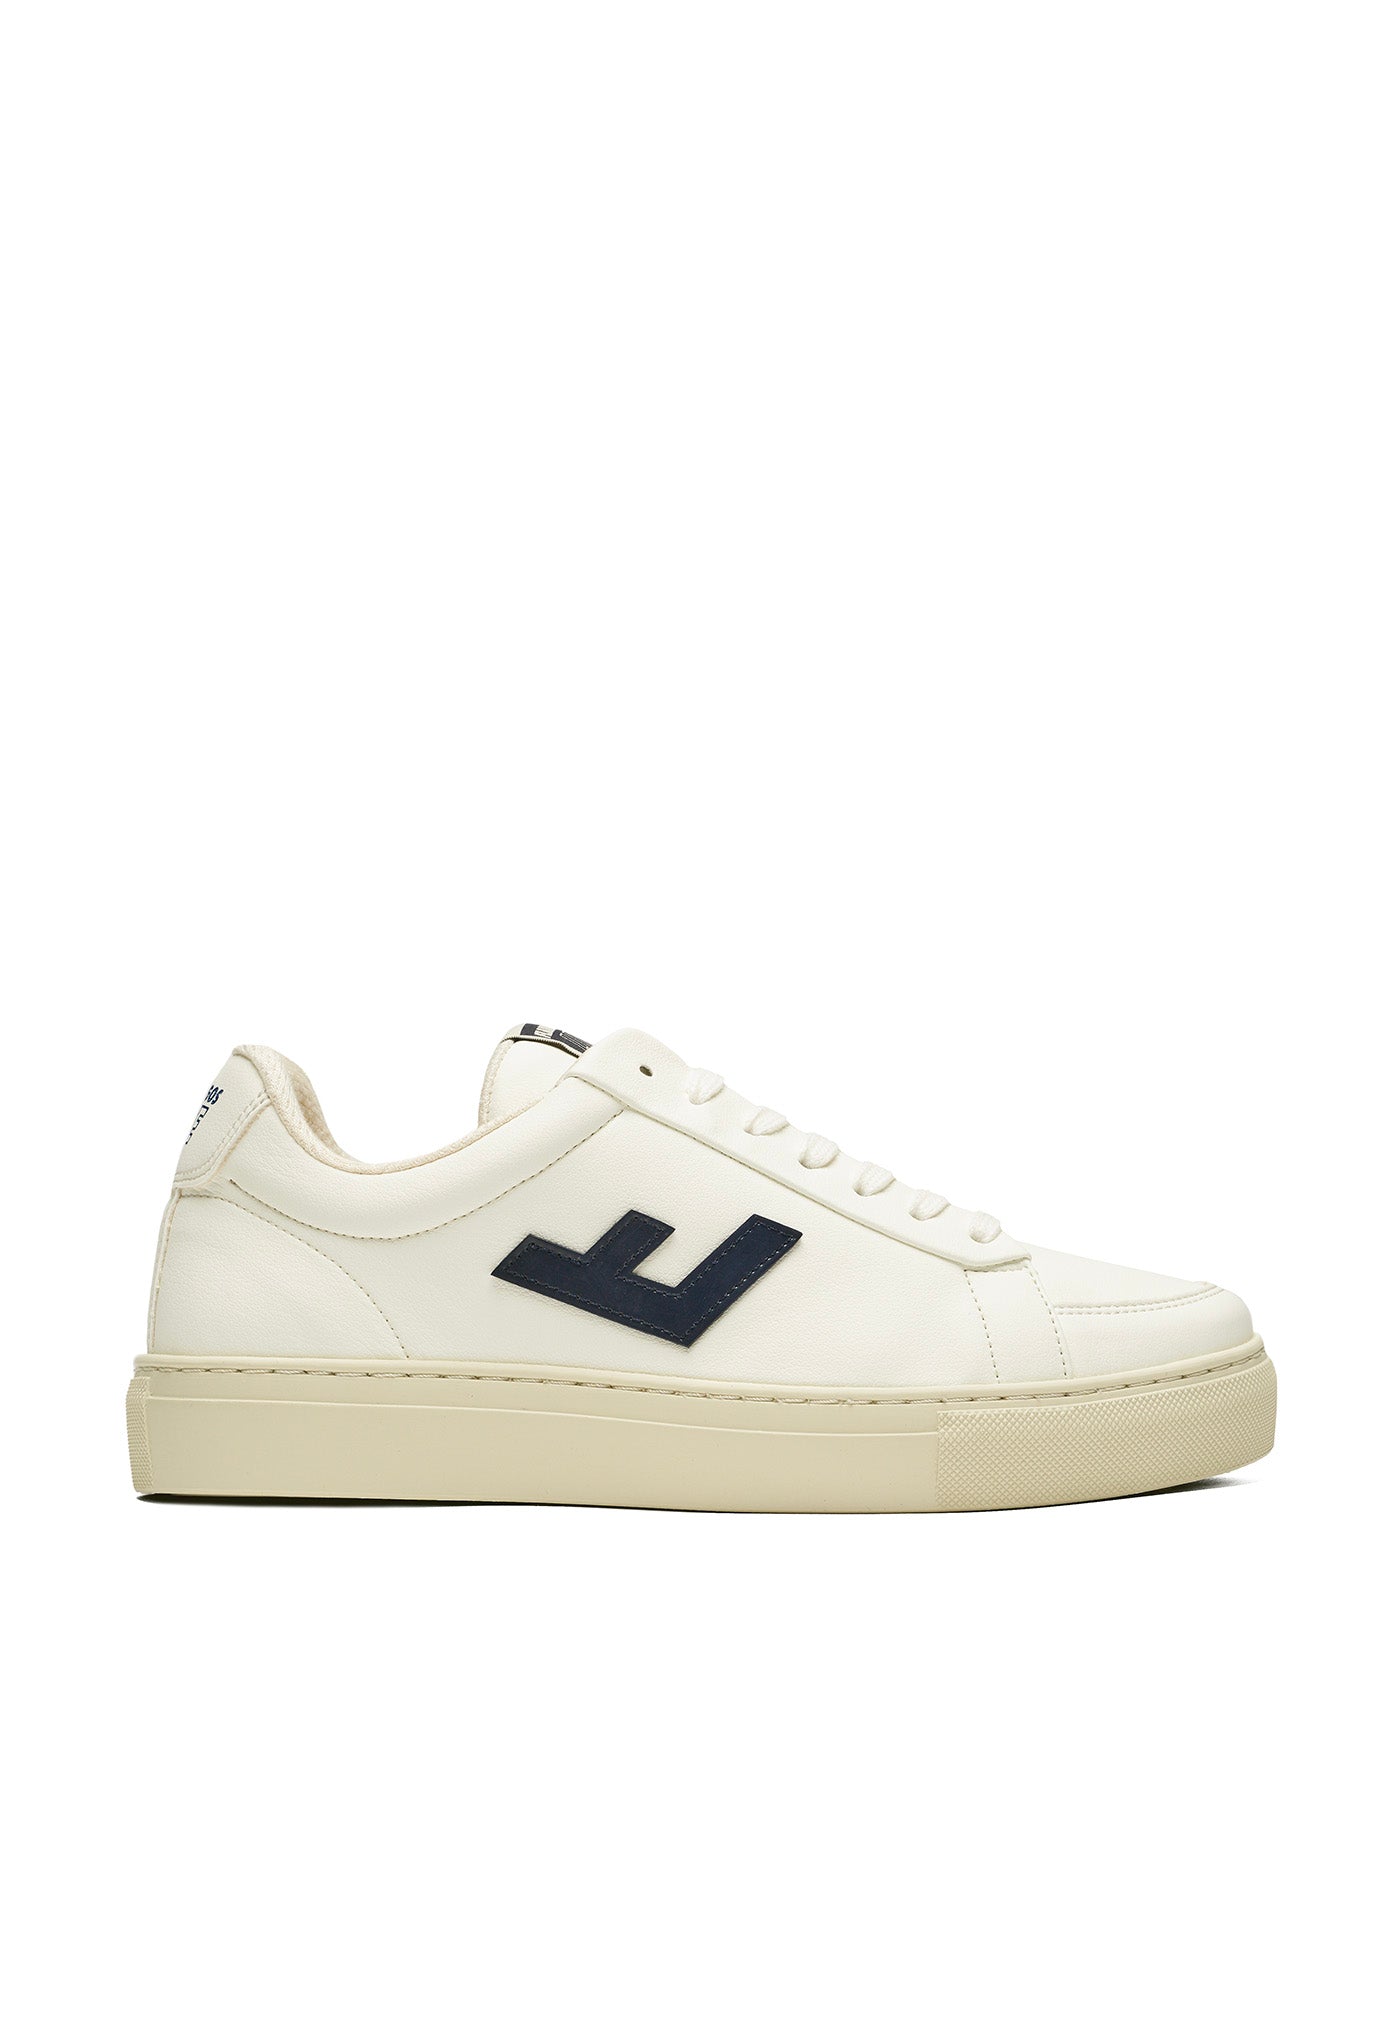 Classic 70s Sneakers - Off White Navy Ecru sold by Angel Divine